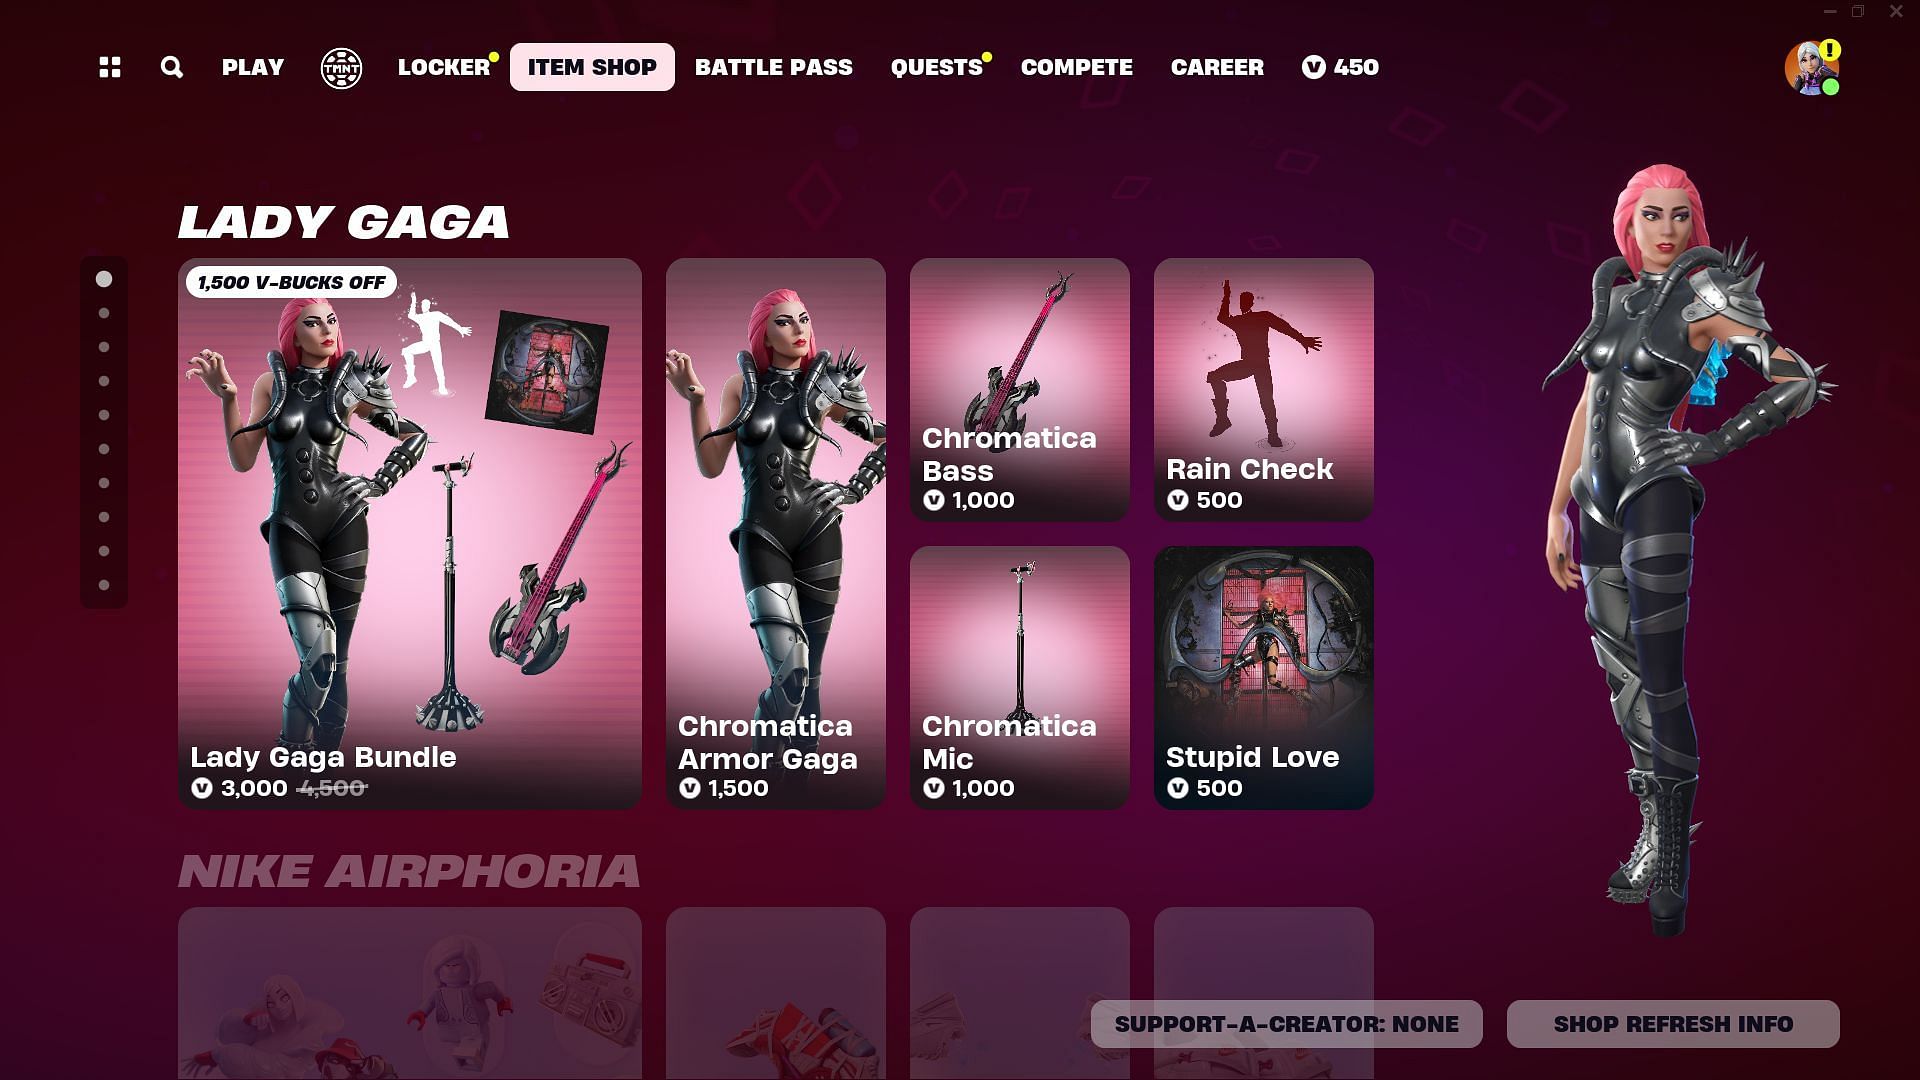 Lady Gaga Skin is currently listed in the Item Shop (Image via Epic Games)